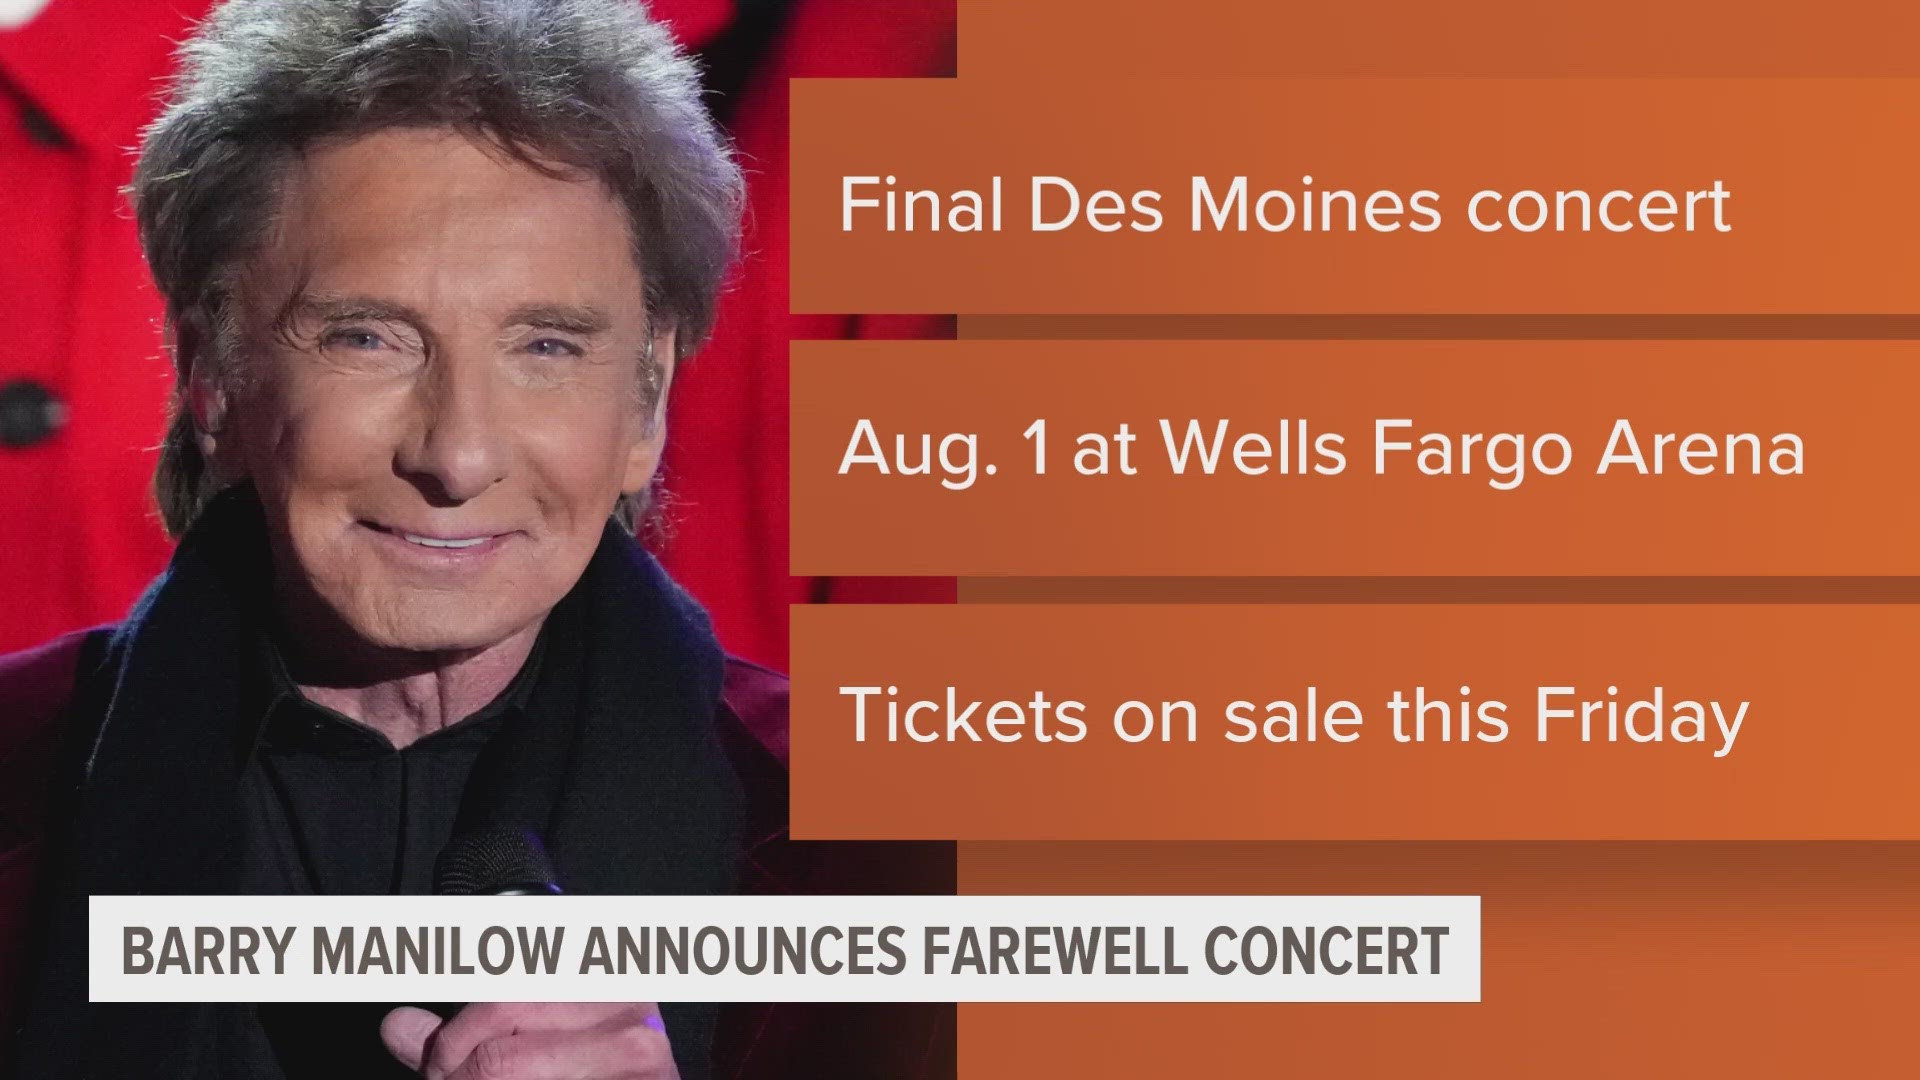 The 80-year-old singer will perform his last Des Moines concert on Aug. 1.